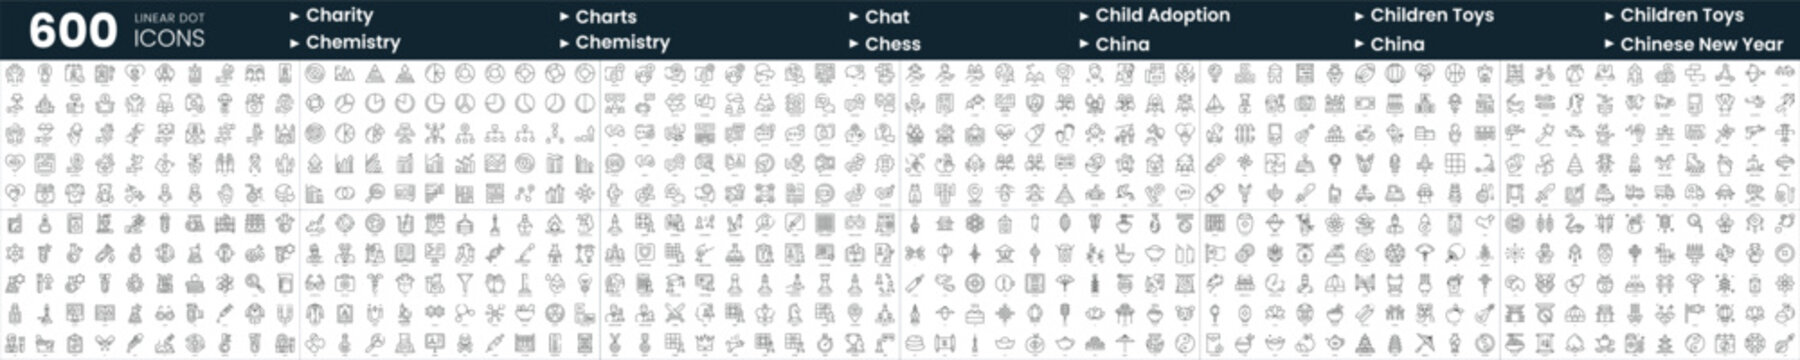 Set of 600 thin line icons. In this bundle include charity, chat, chess, children toys and more